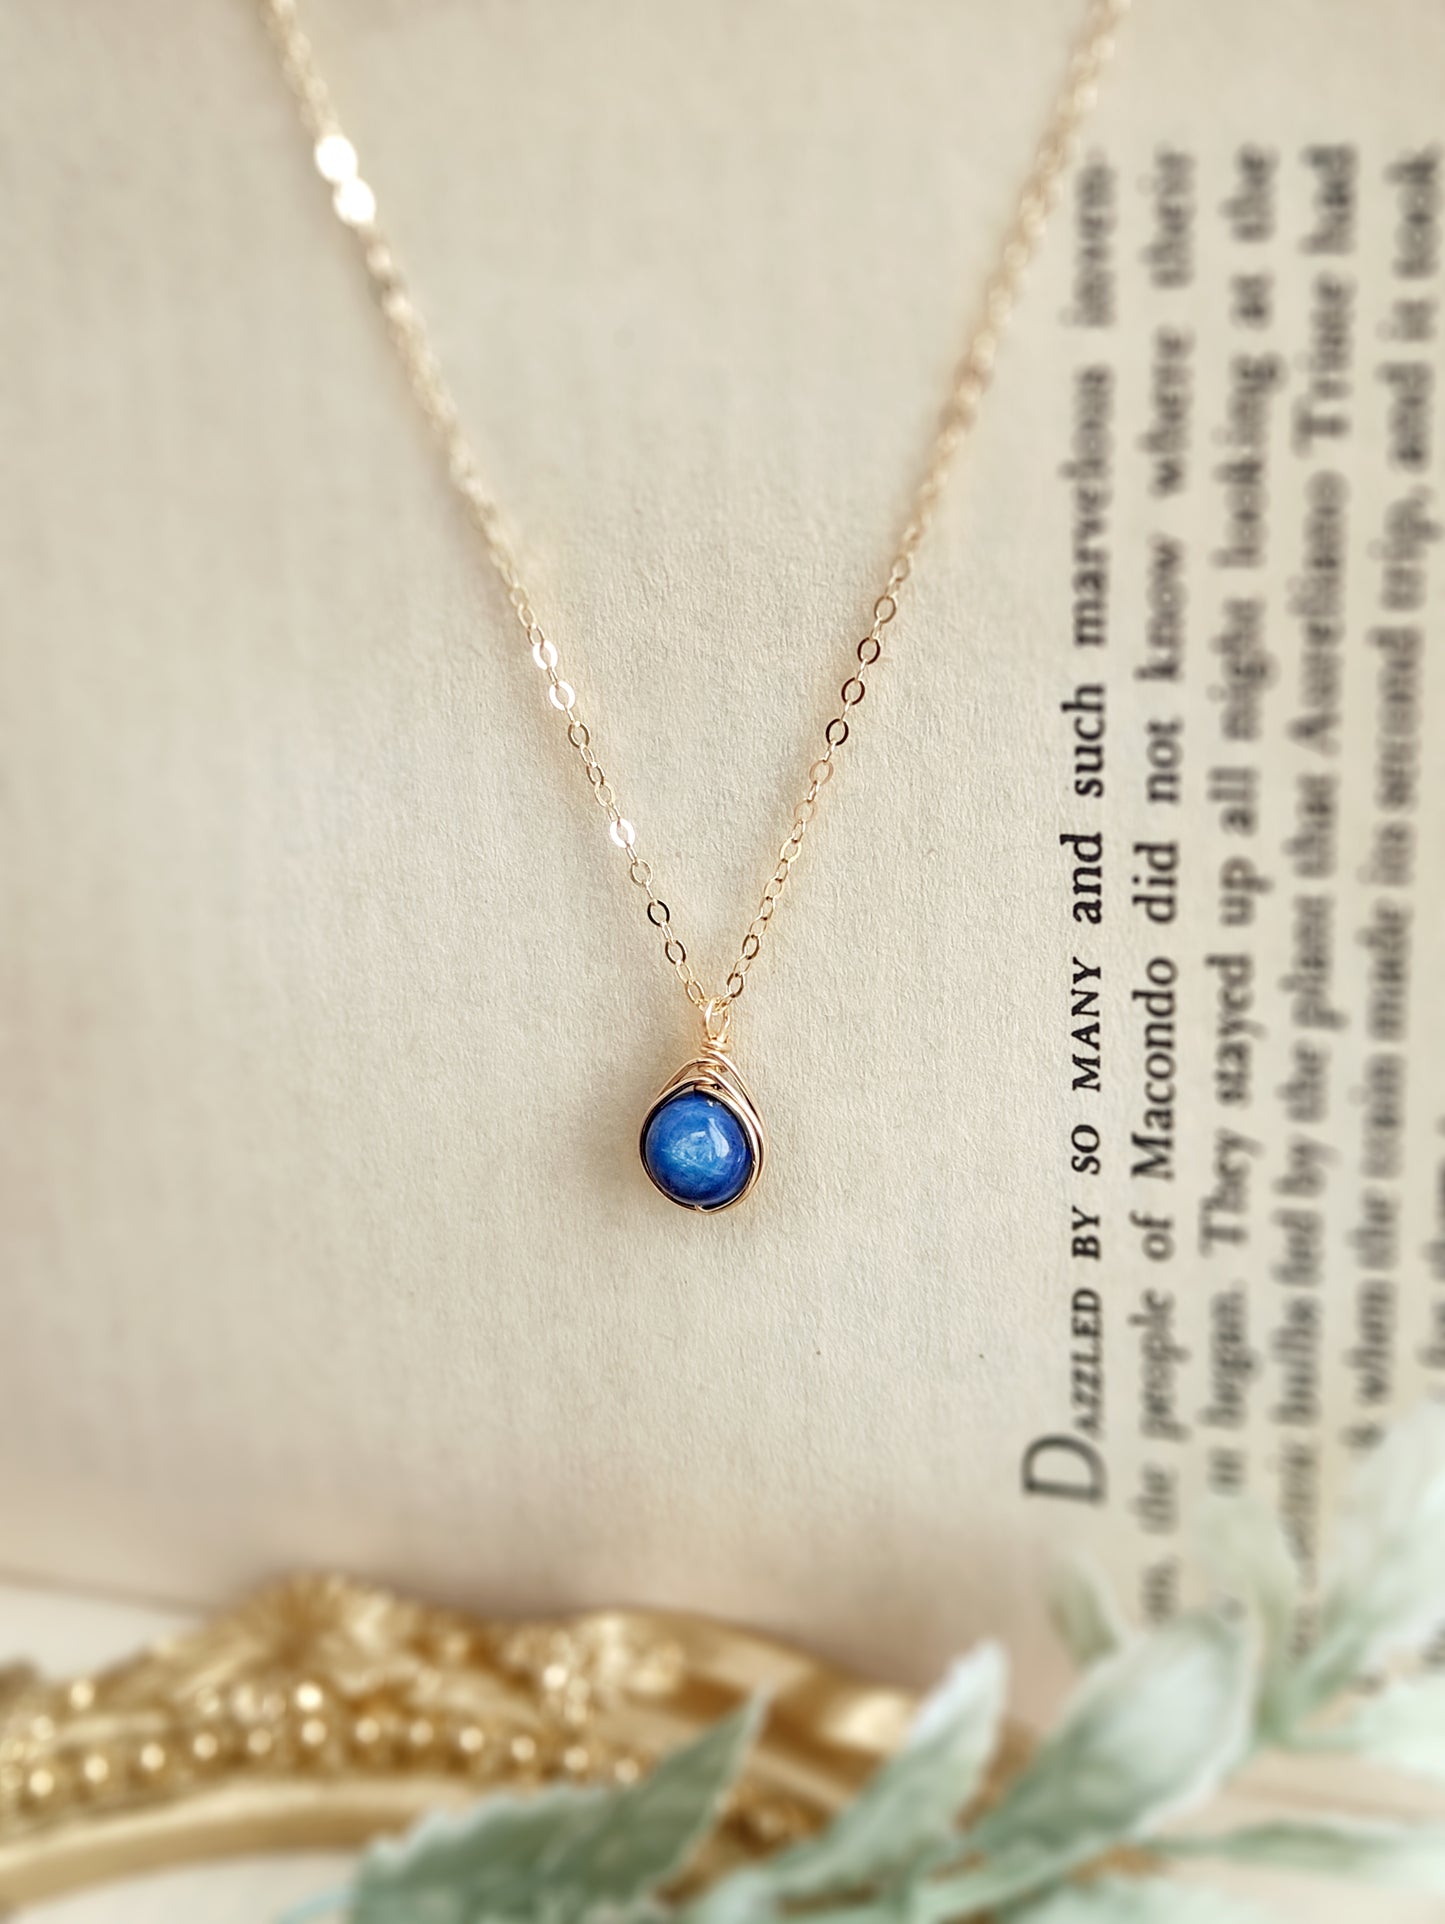 Blue Kyanite Necklace with 6mm stone